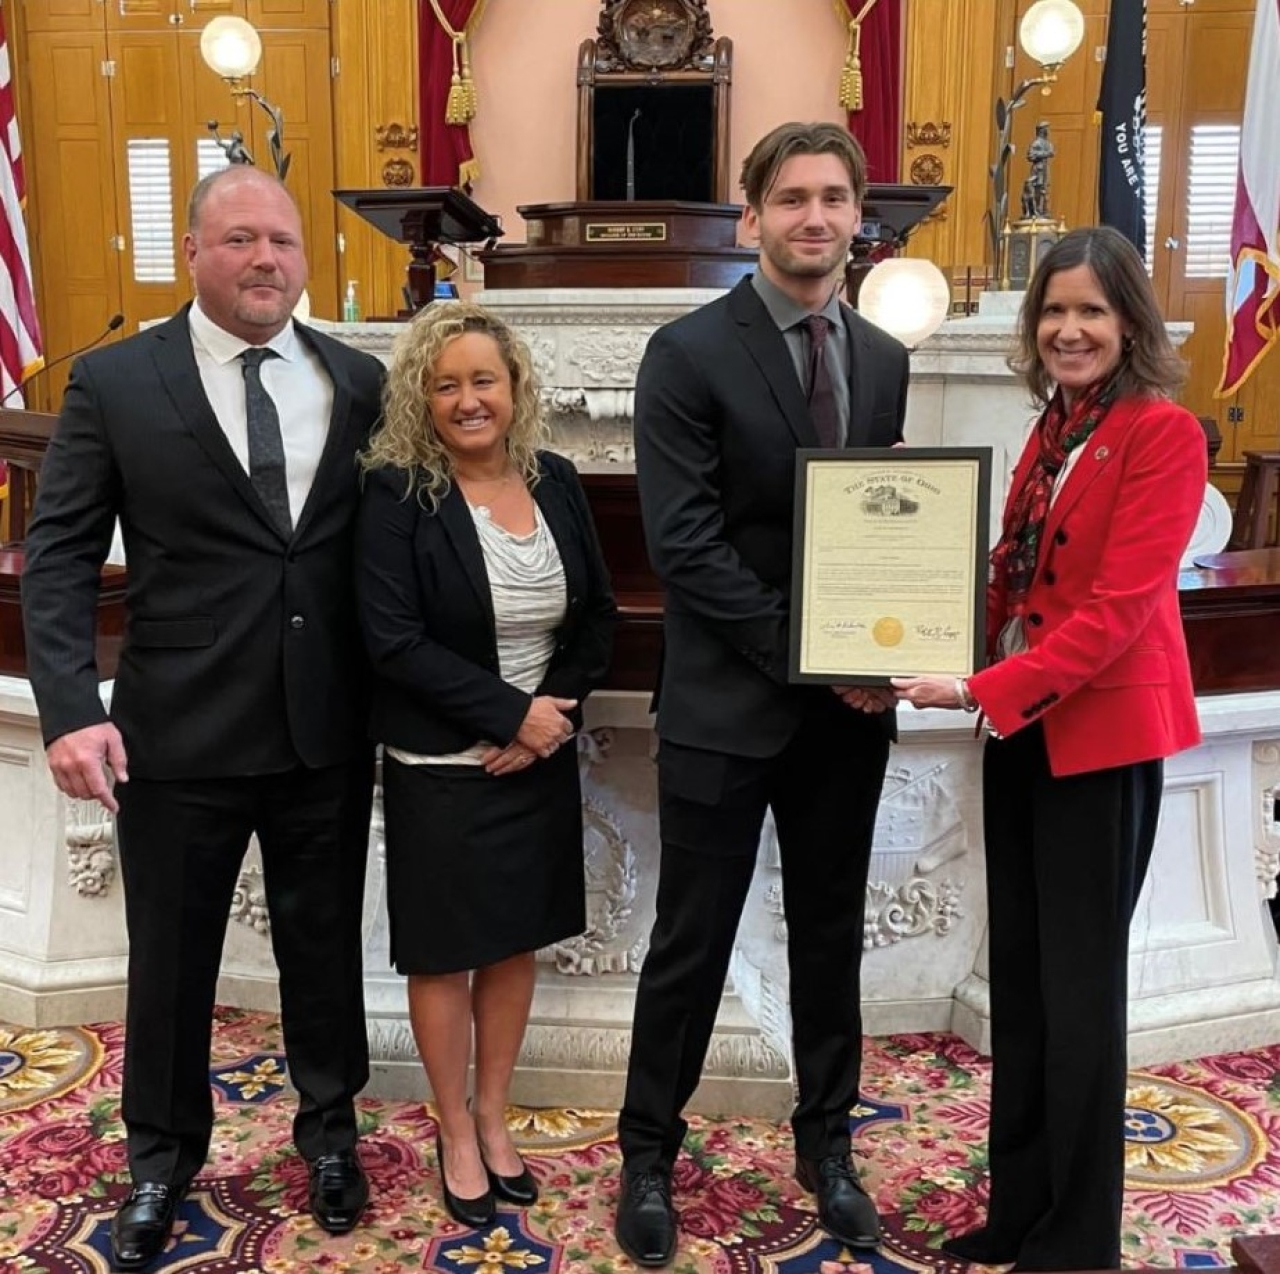 Representative Richardson was pleased to honor Gabe Powers for receiving the USA Today Ohio High School Sports Award for football.